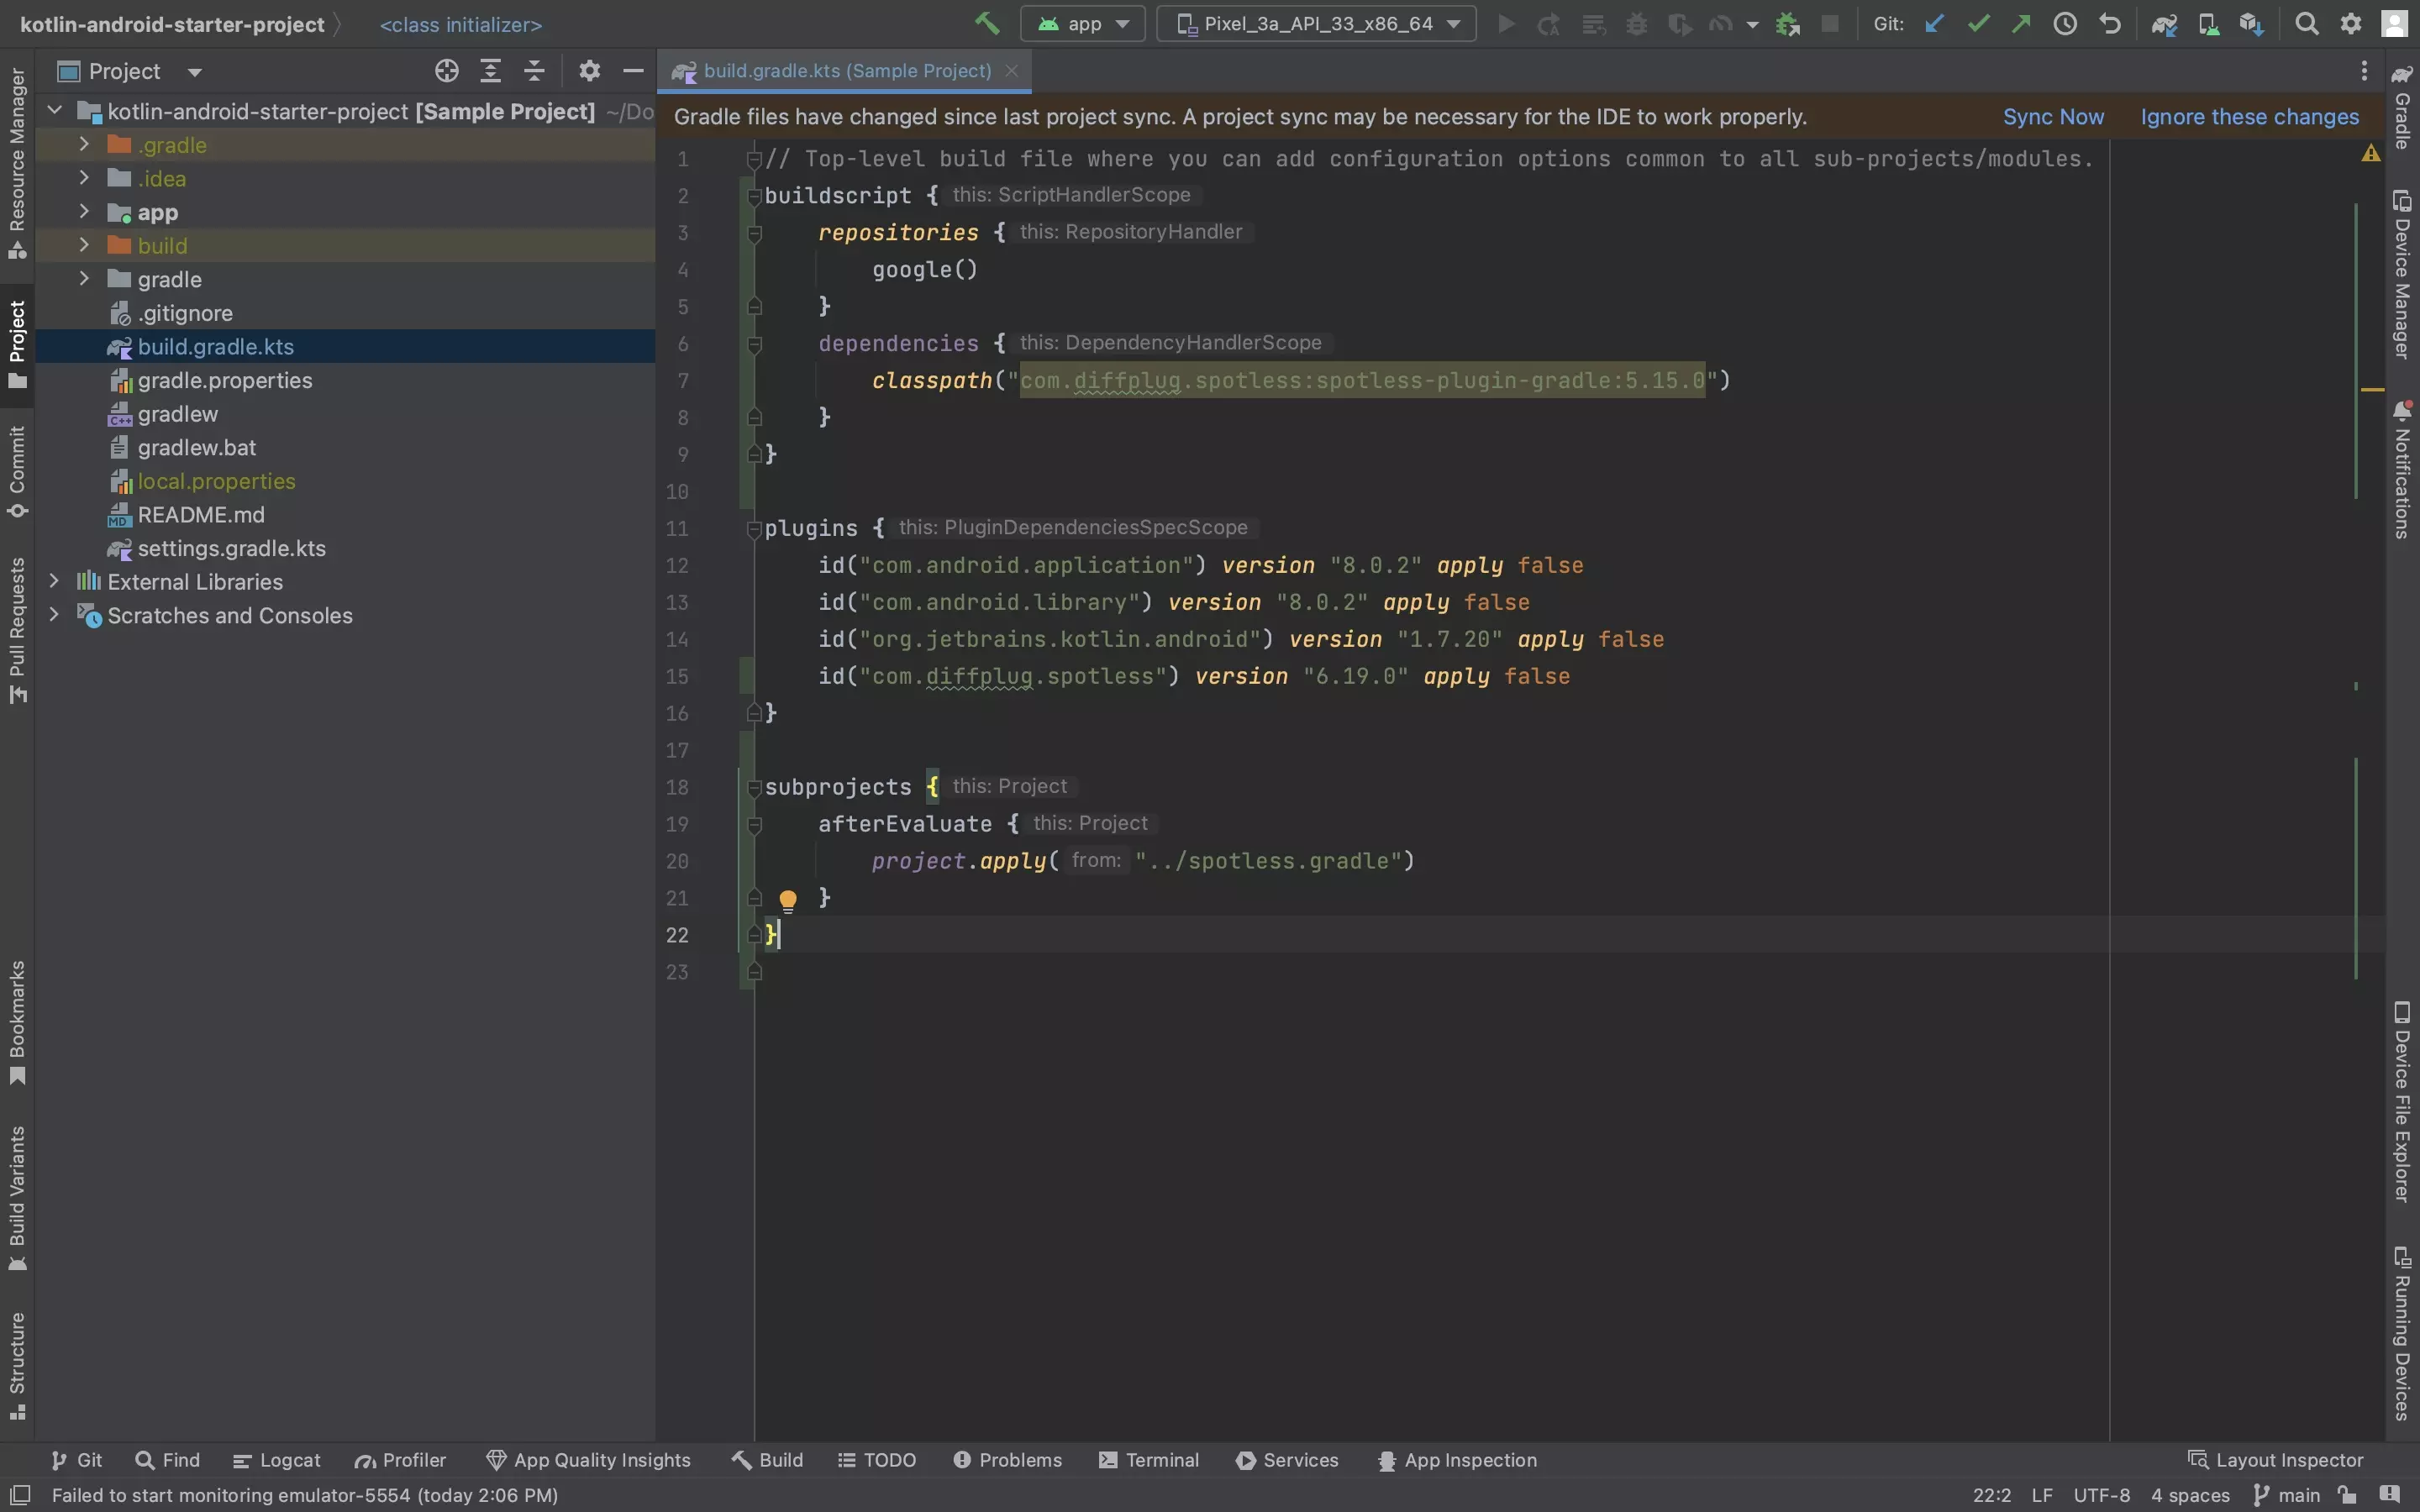 A screenshot of Android Studio showing the completed build.gradle.kts of our starter project after applying the steps below.